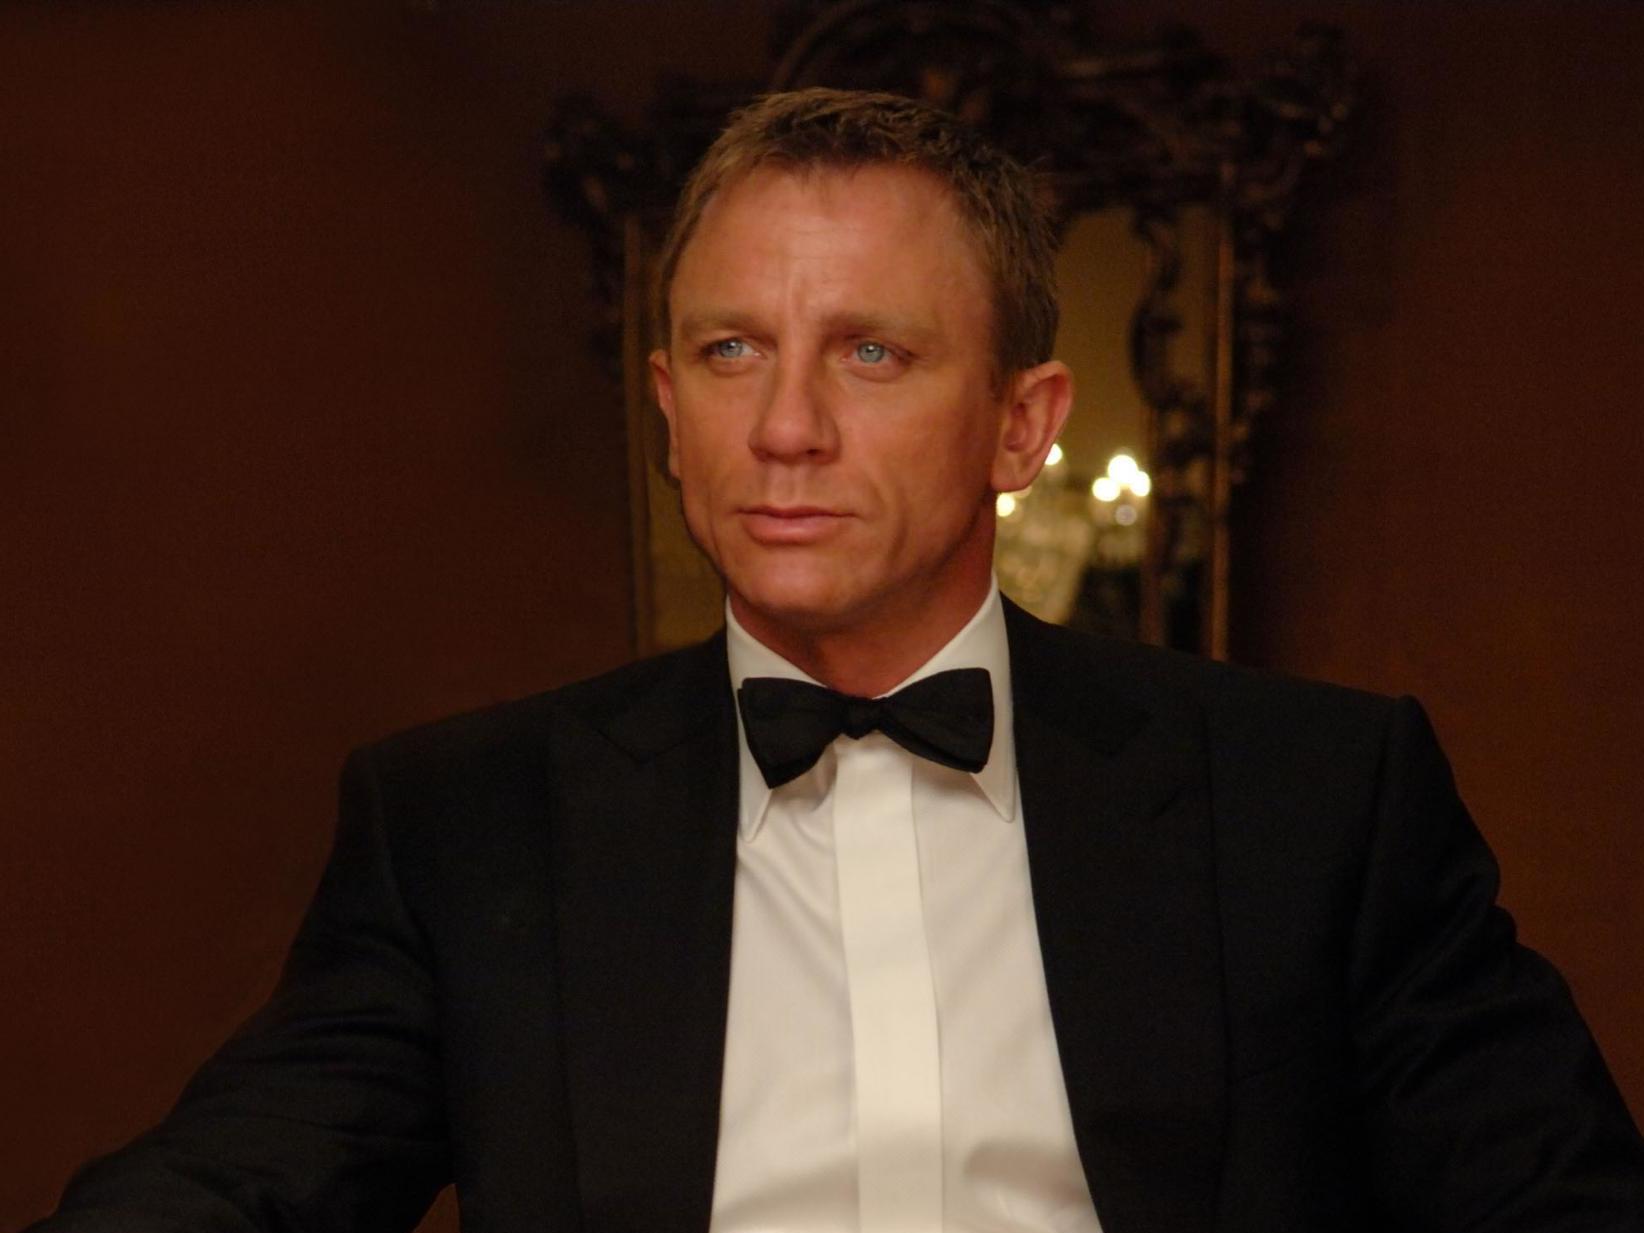 ‘No Time to Die’ will be Craig’s final appearance as the 007 agent